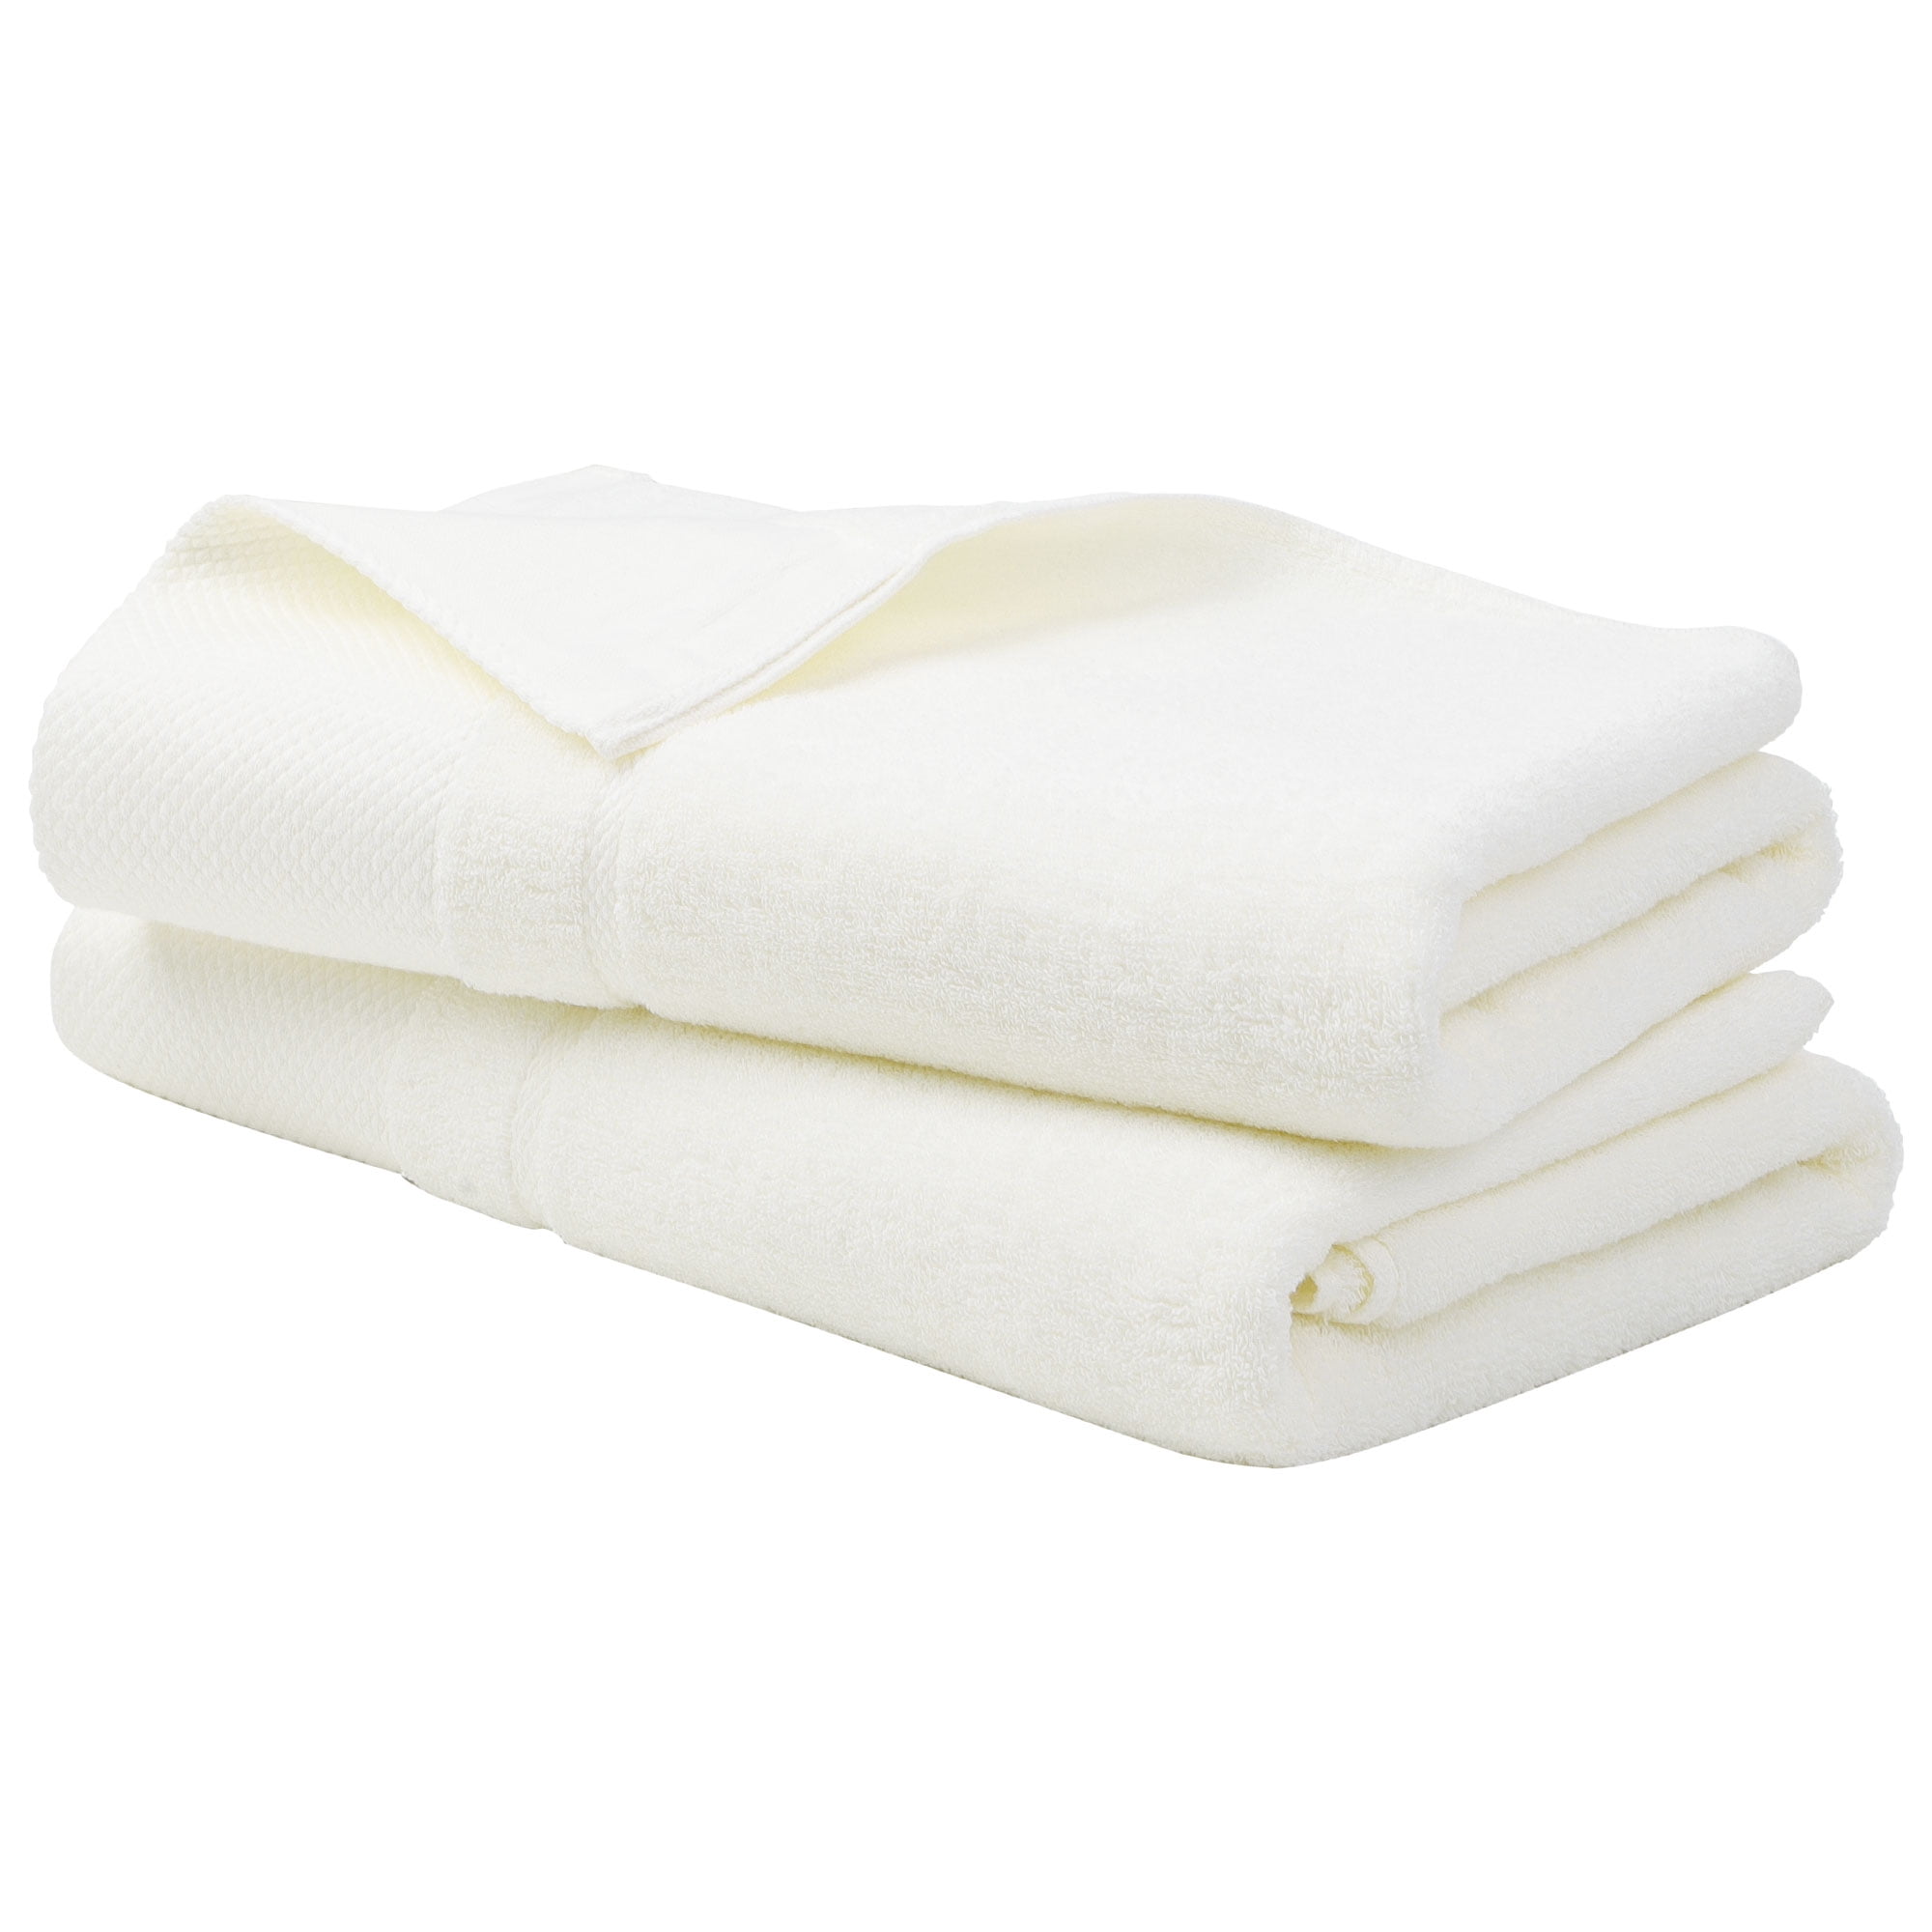 These 'Fluffy and Absorbent' Towels Are on Sale for Under $7